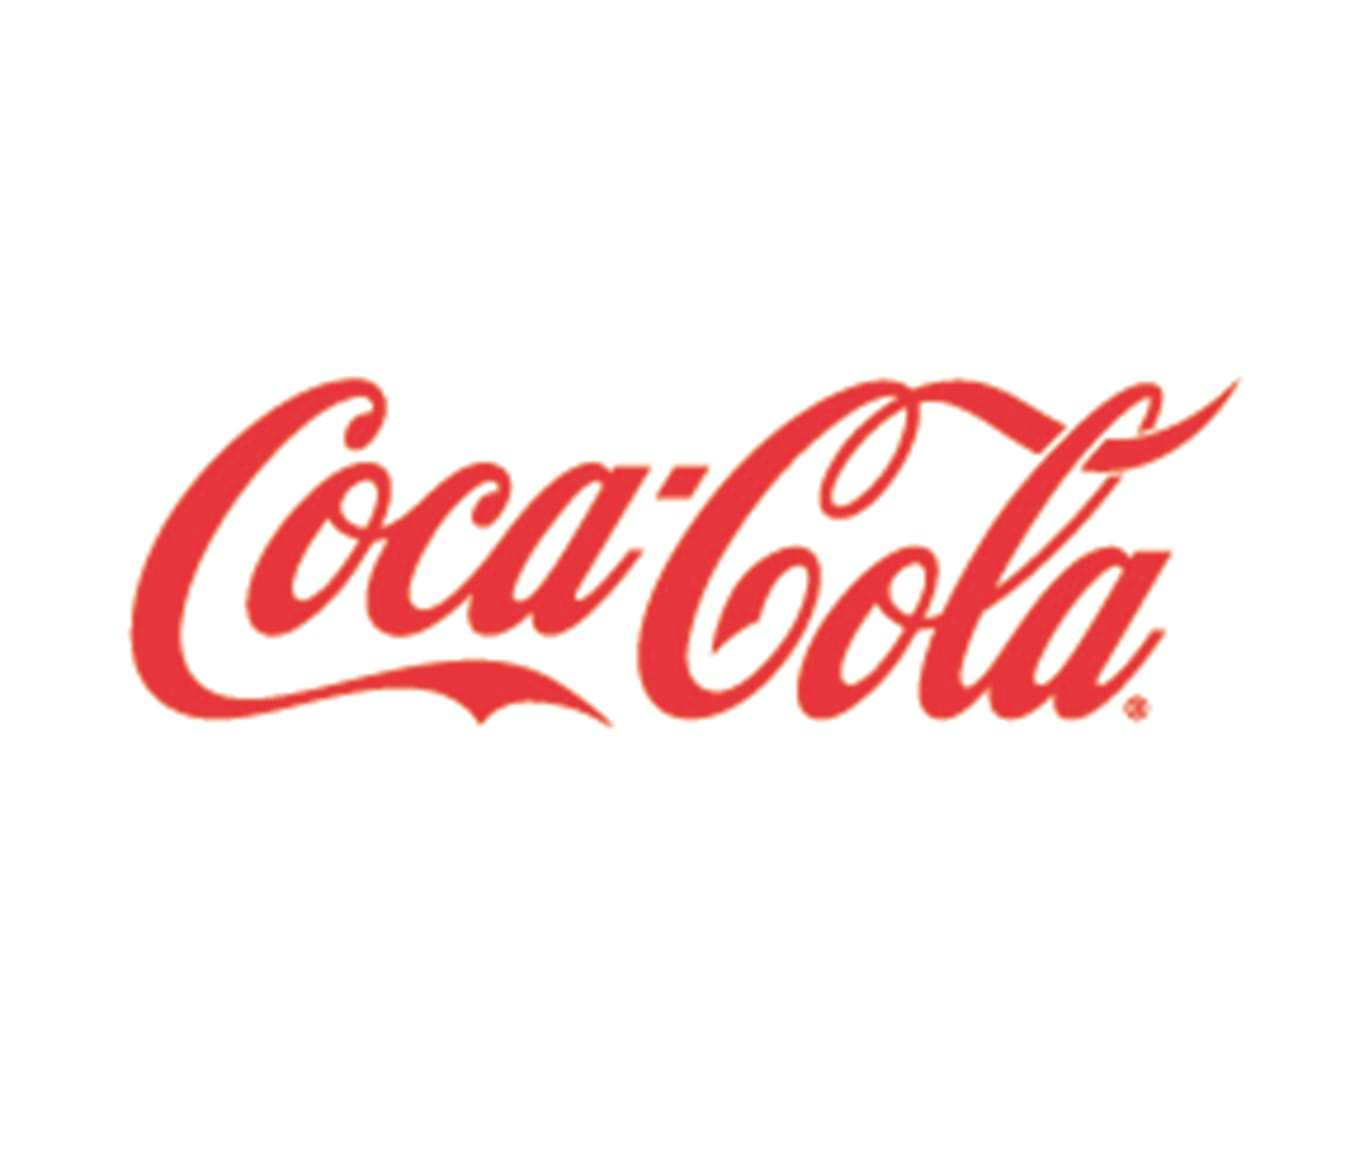 The Official Logo of Coca Cola for Squaw Valley Alpine Meadows